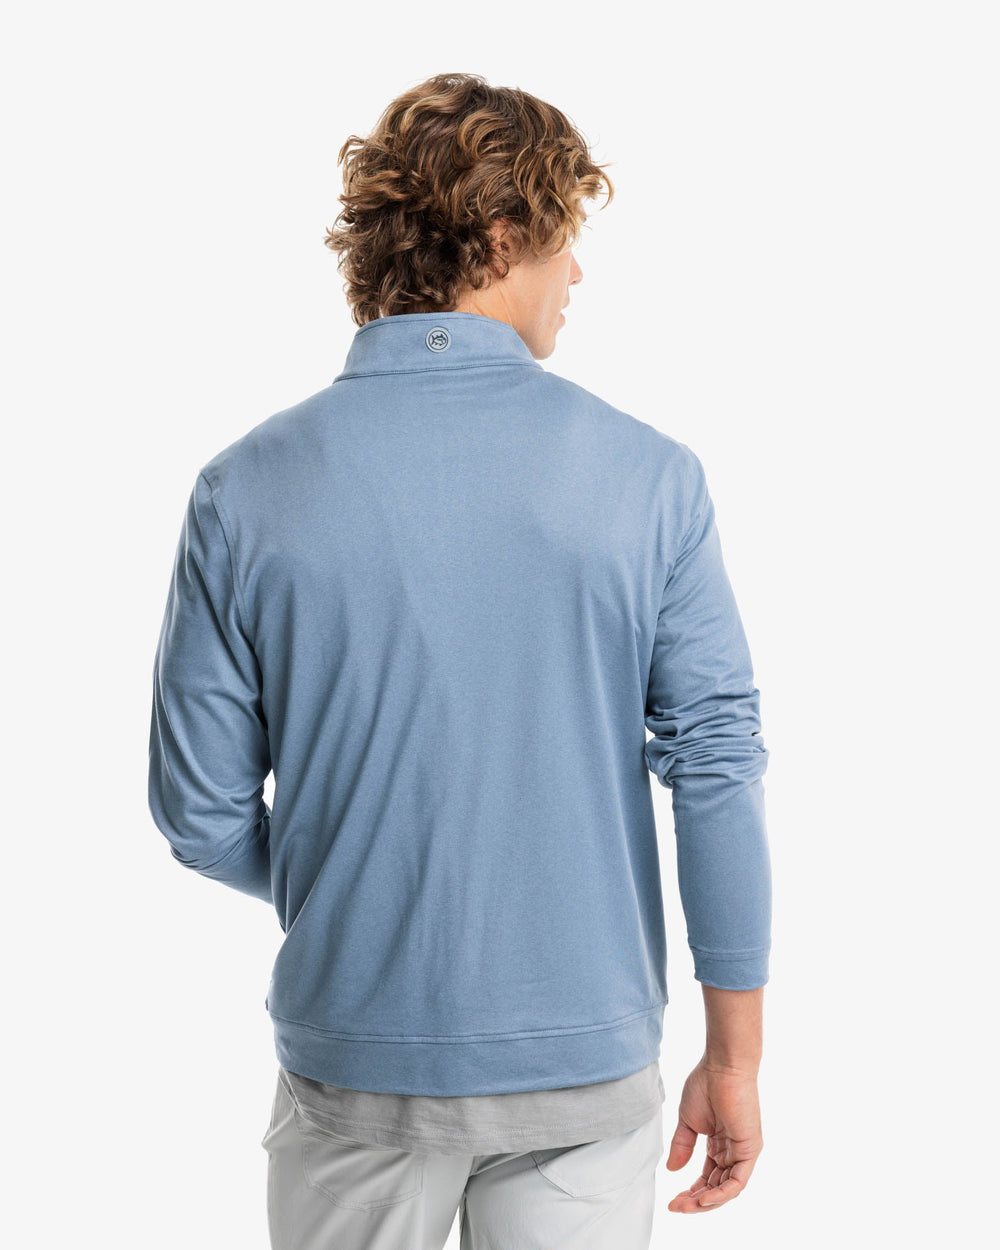 The back view of the Backbarrier Heather Performance Quarter Zip Pullover by Southern Tide - Heather Blue Haze